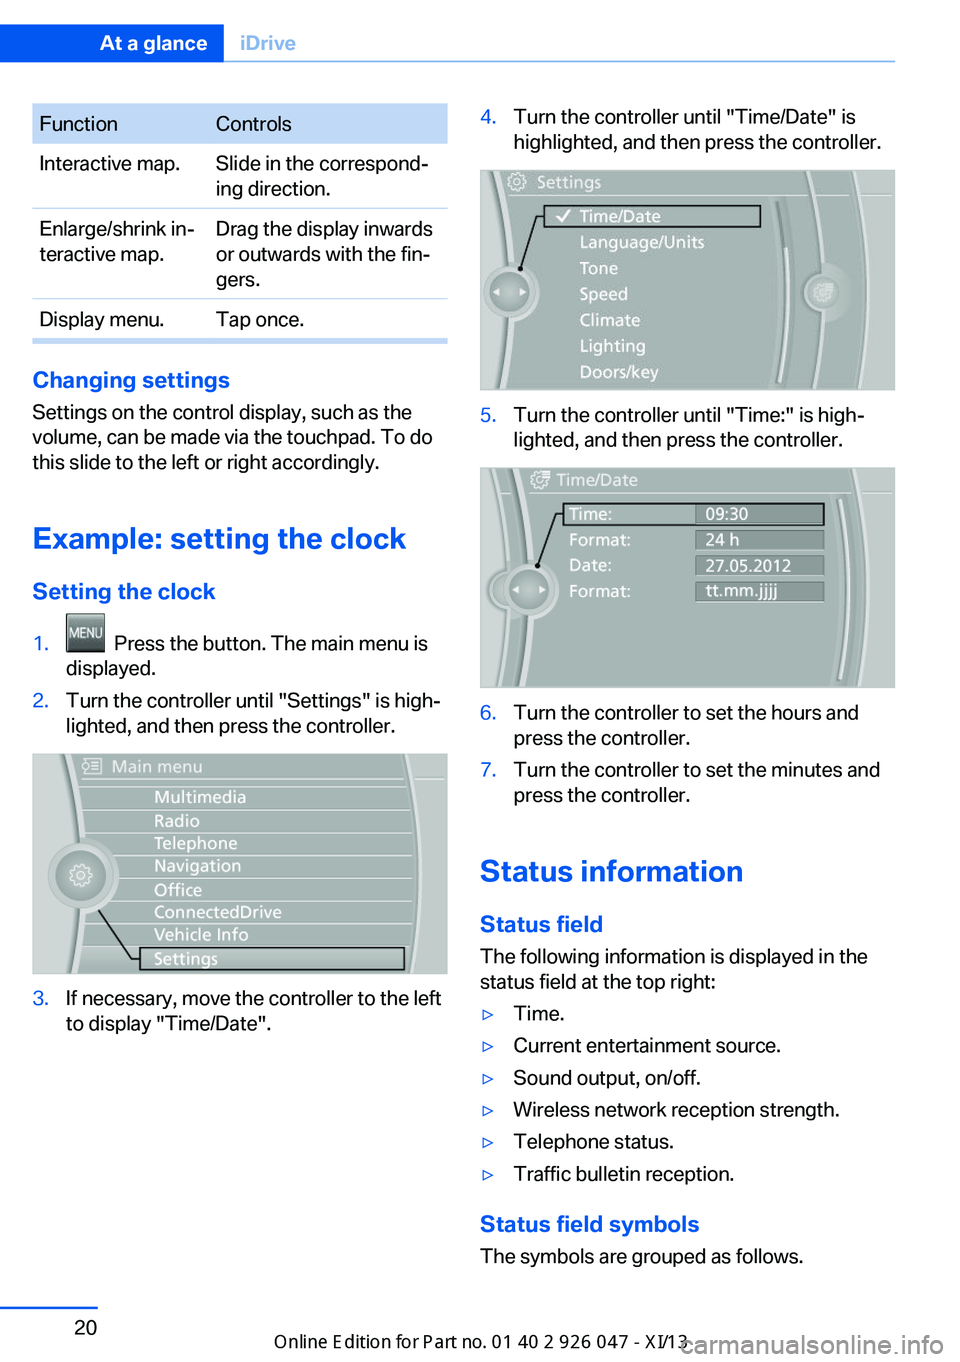 BMW X3 2013 F25 Owners Manual FunctionControlsInteractive map.Slide in the correspond‐
ing direction.Enlarge/shrink in‐
teractive map.Drag the display inwards
or outwards with the fin‐
gers.Display menu.Tap once.
Changing se